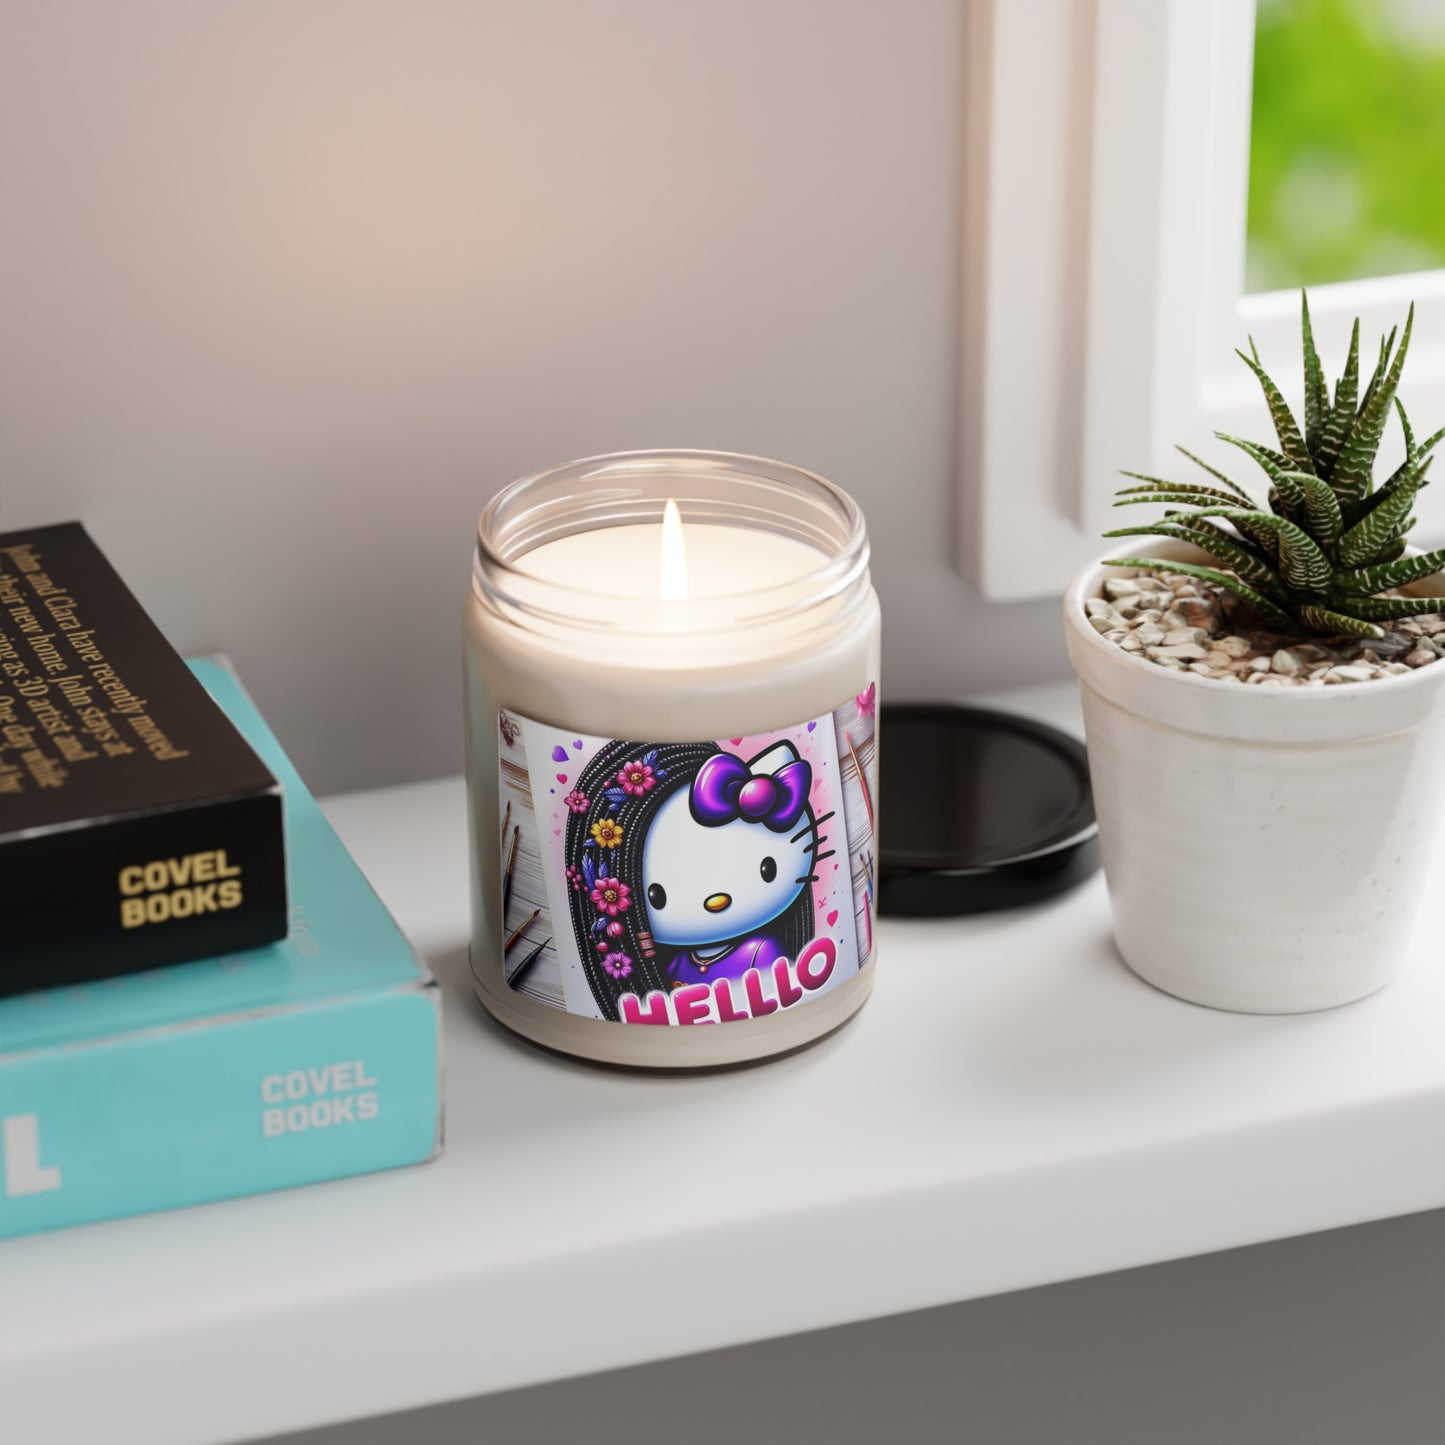 Painted Hello Kitty with Braids Scented Soy Candle, 9oz